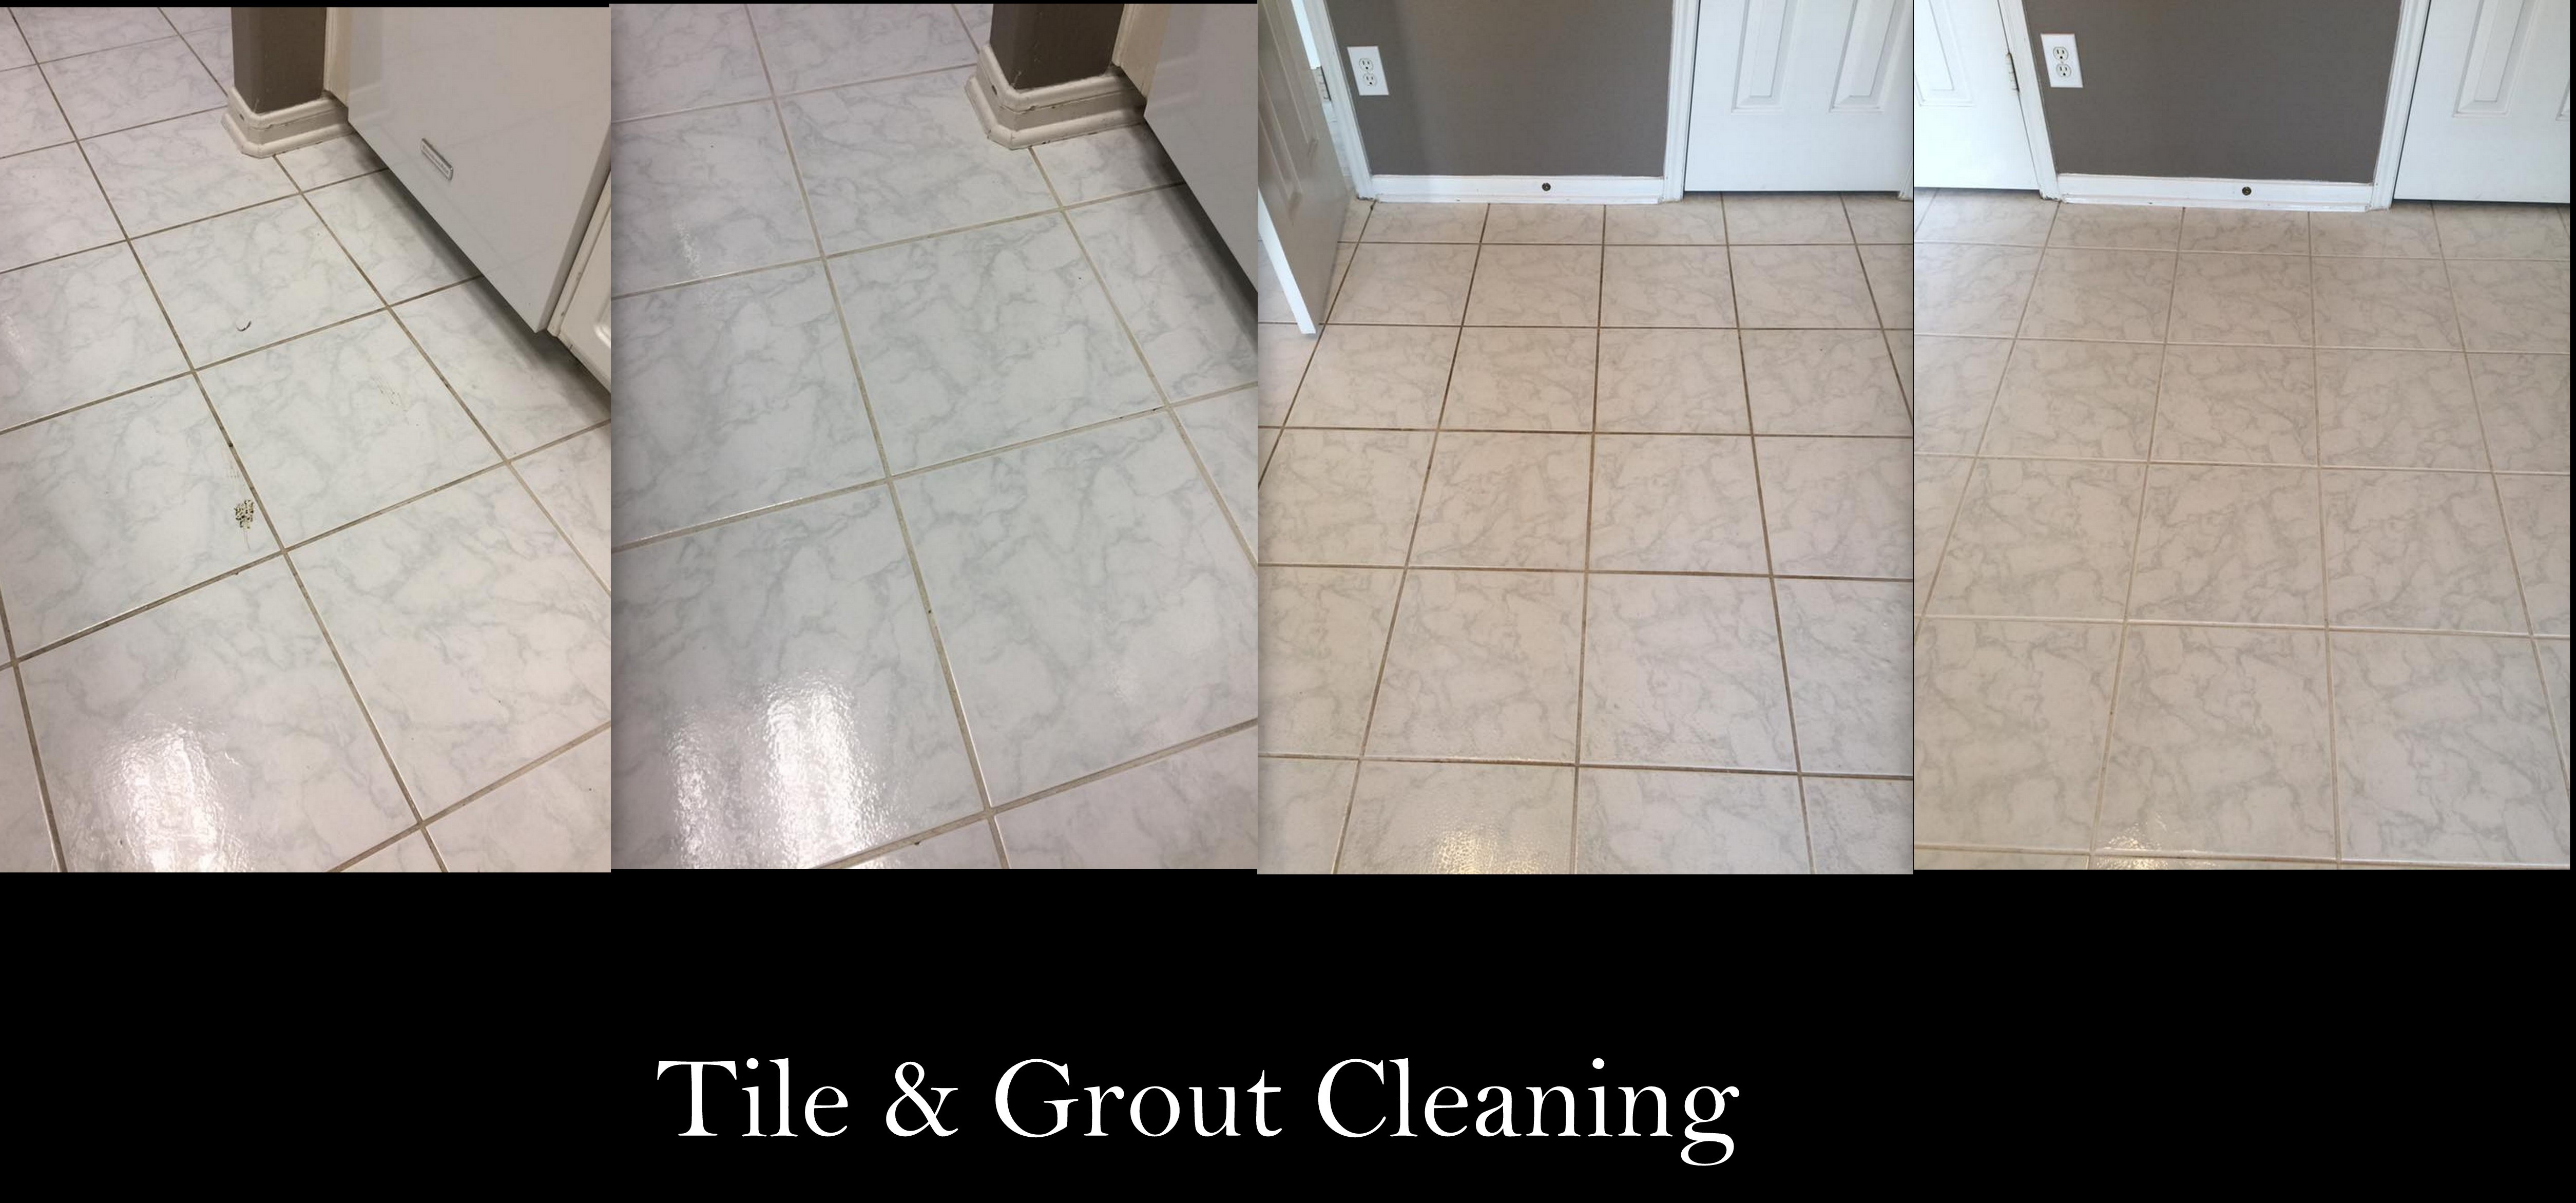 How to Clean Floor Tile Grout with Steam - Hen and Horse Design